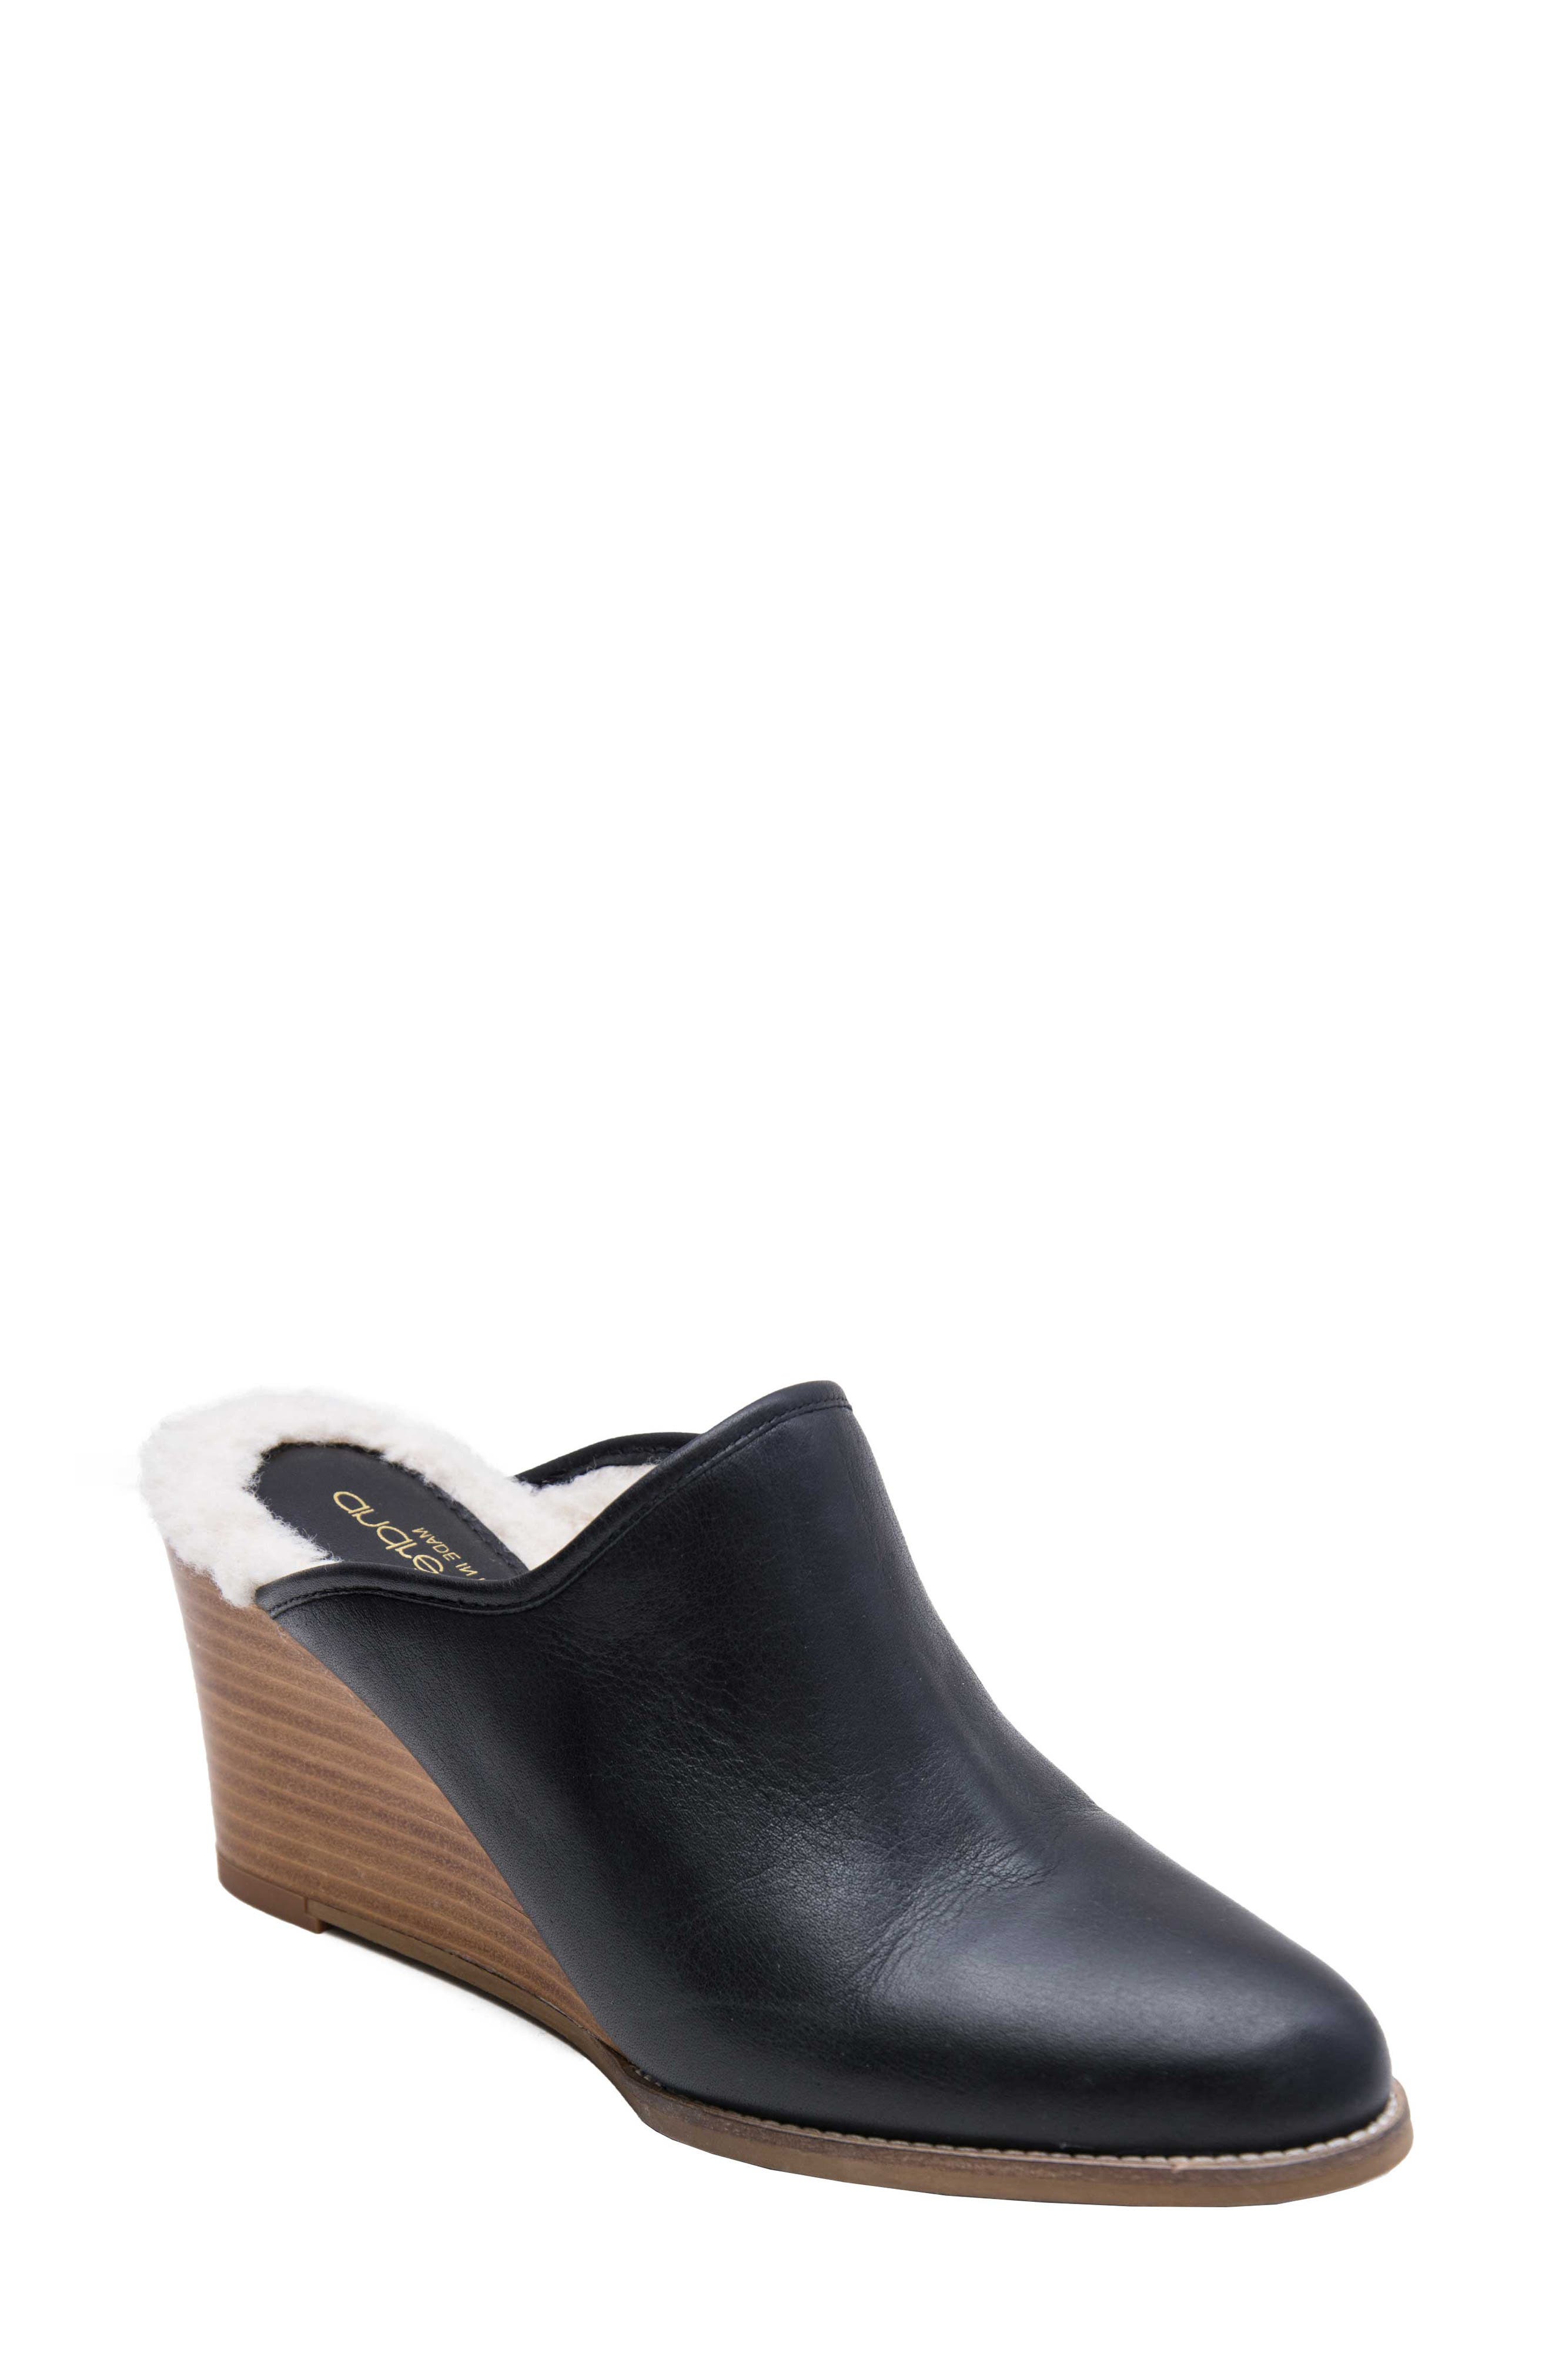 leather wedge mule